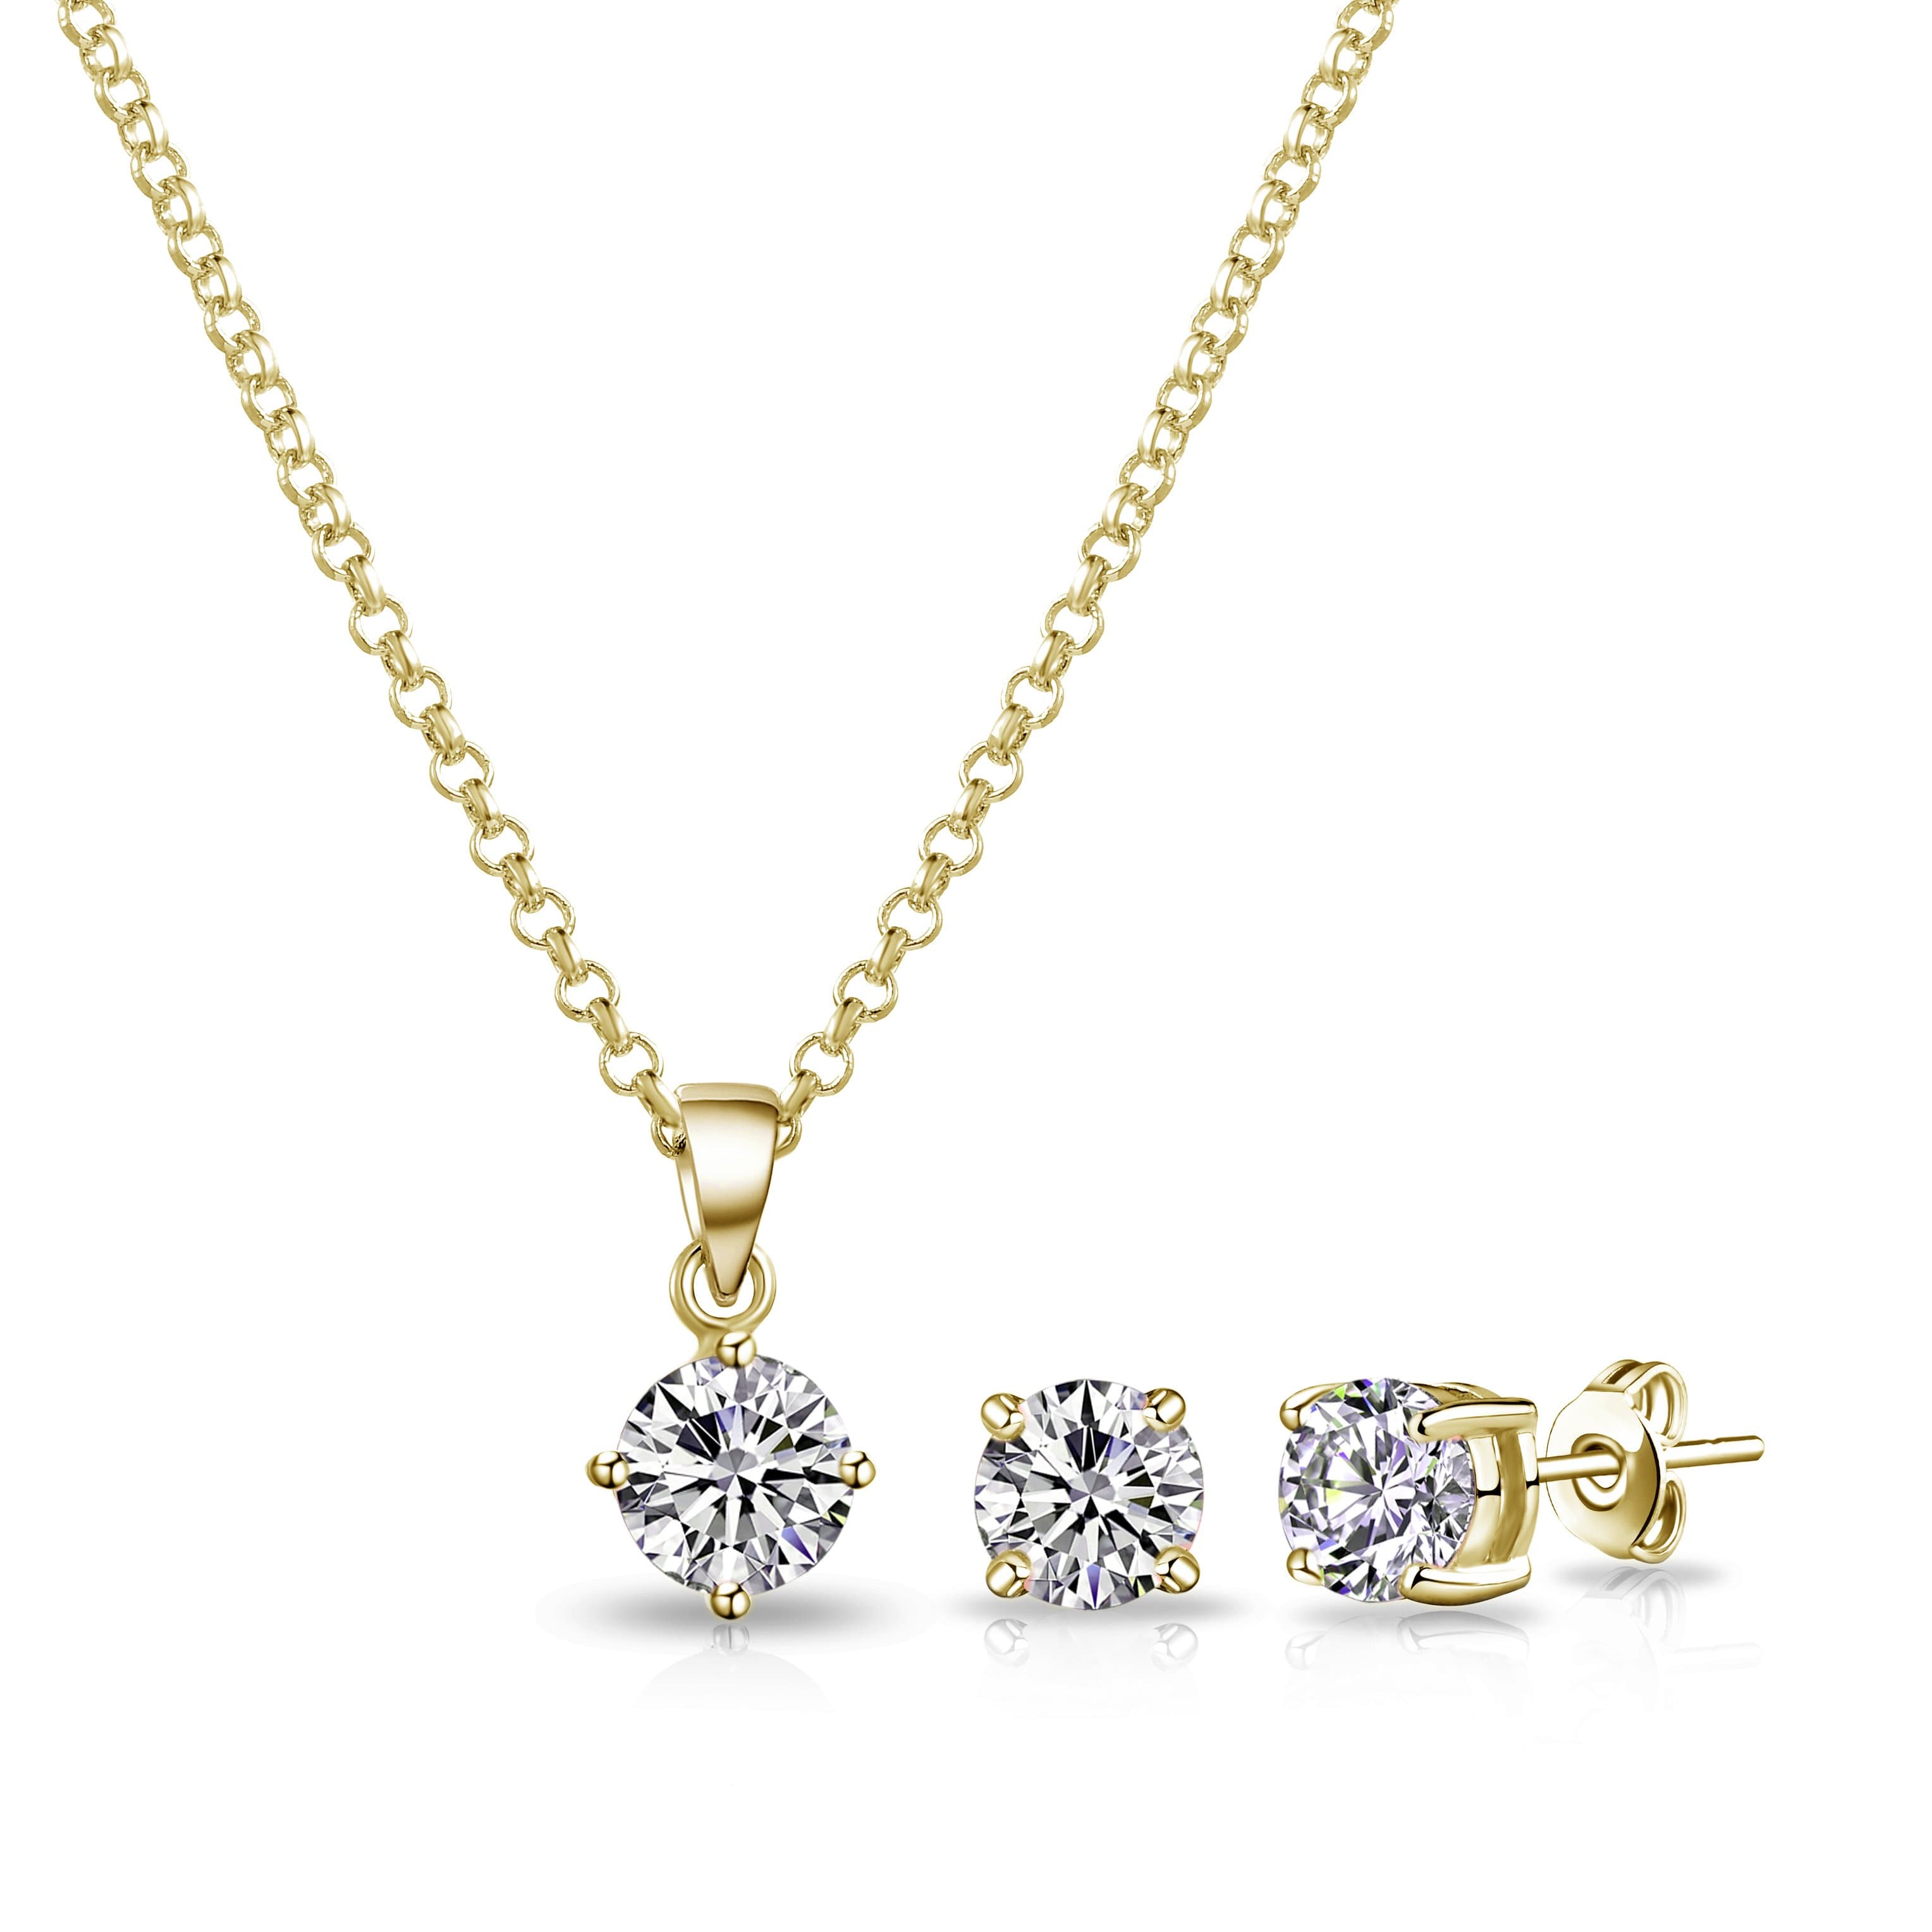 Gold Plated Round Solitaire Set Created with Zircondia® Crystals by Philip Jones Jewellery